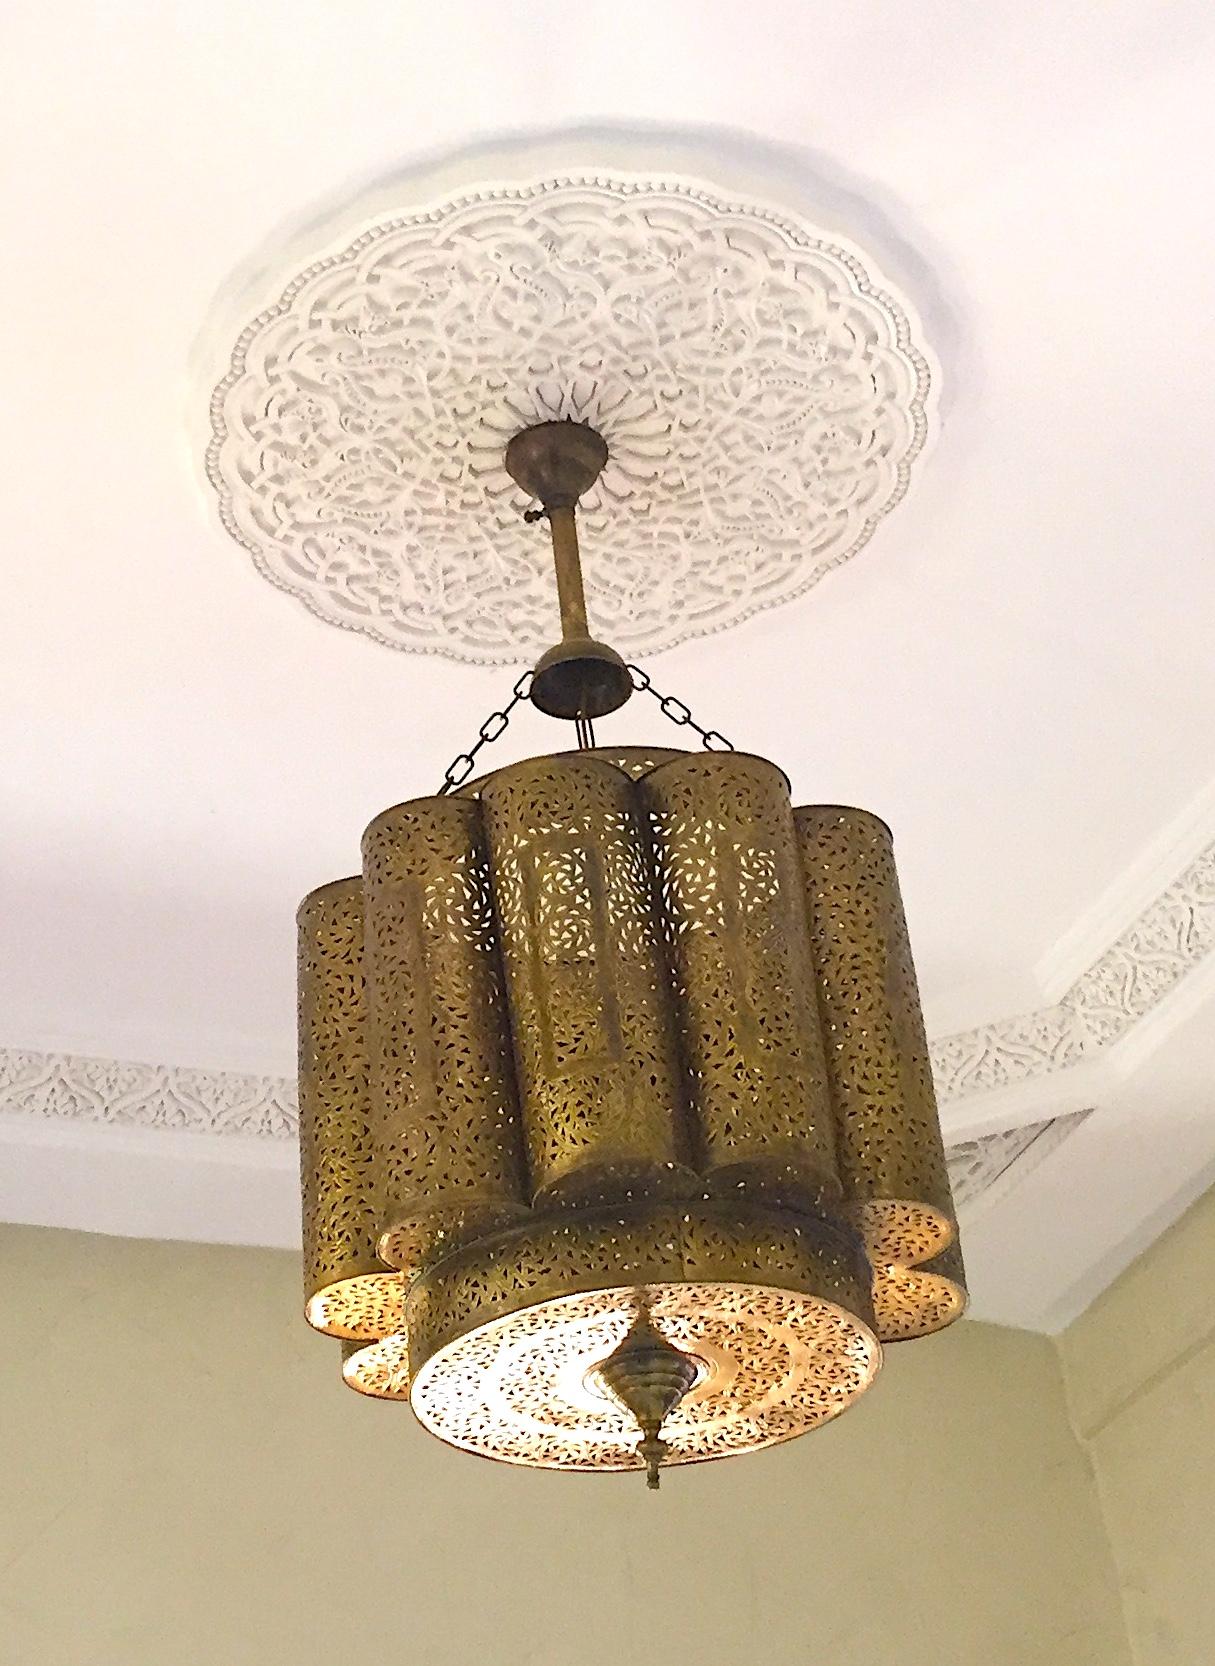 Large brass Moroccan chandelier in the style of Alberto Pinto design.
This Moorish light fixture is delicately handcrafted, hand-hammered and chiselled with Fine Moorish filigree designs by skilled Moroccan artisans.
Measure: The size of the light